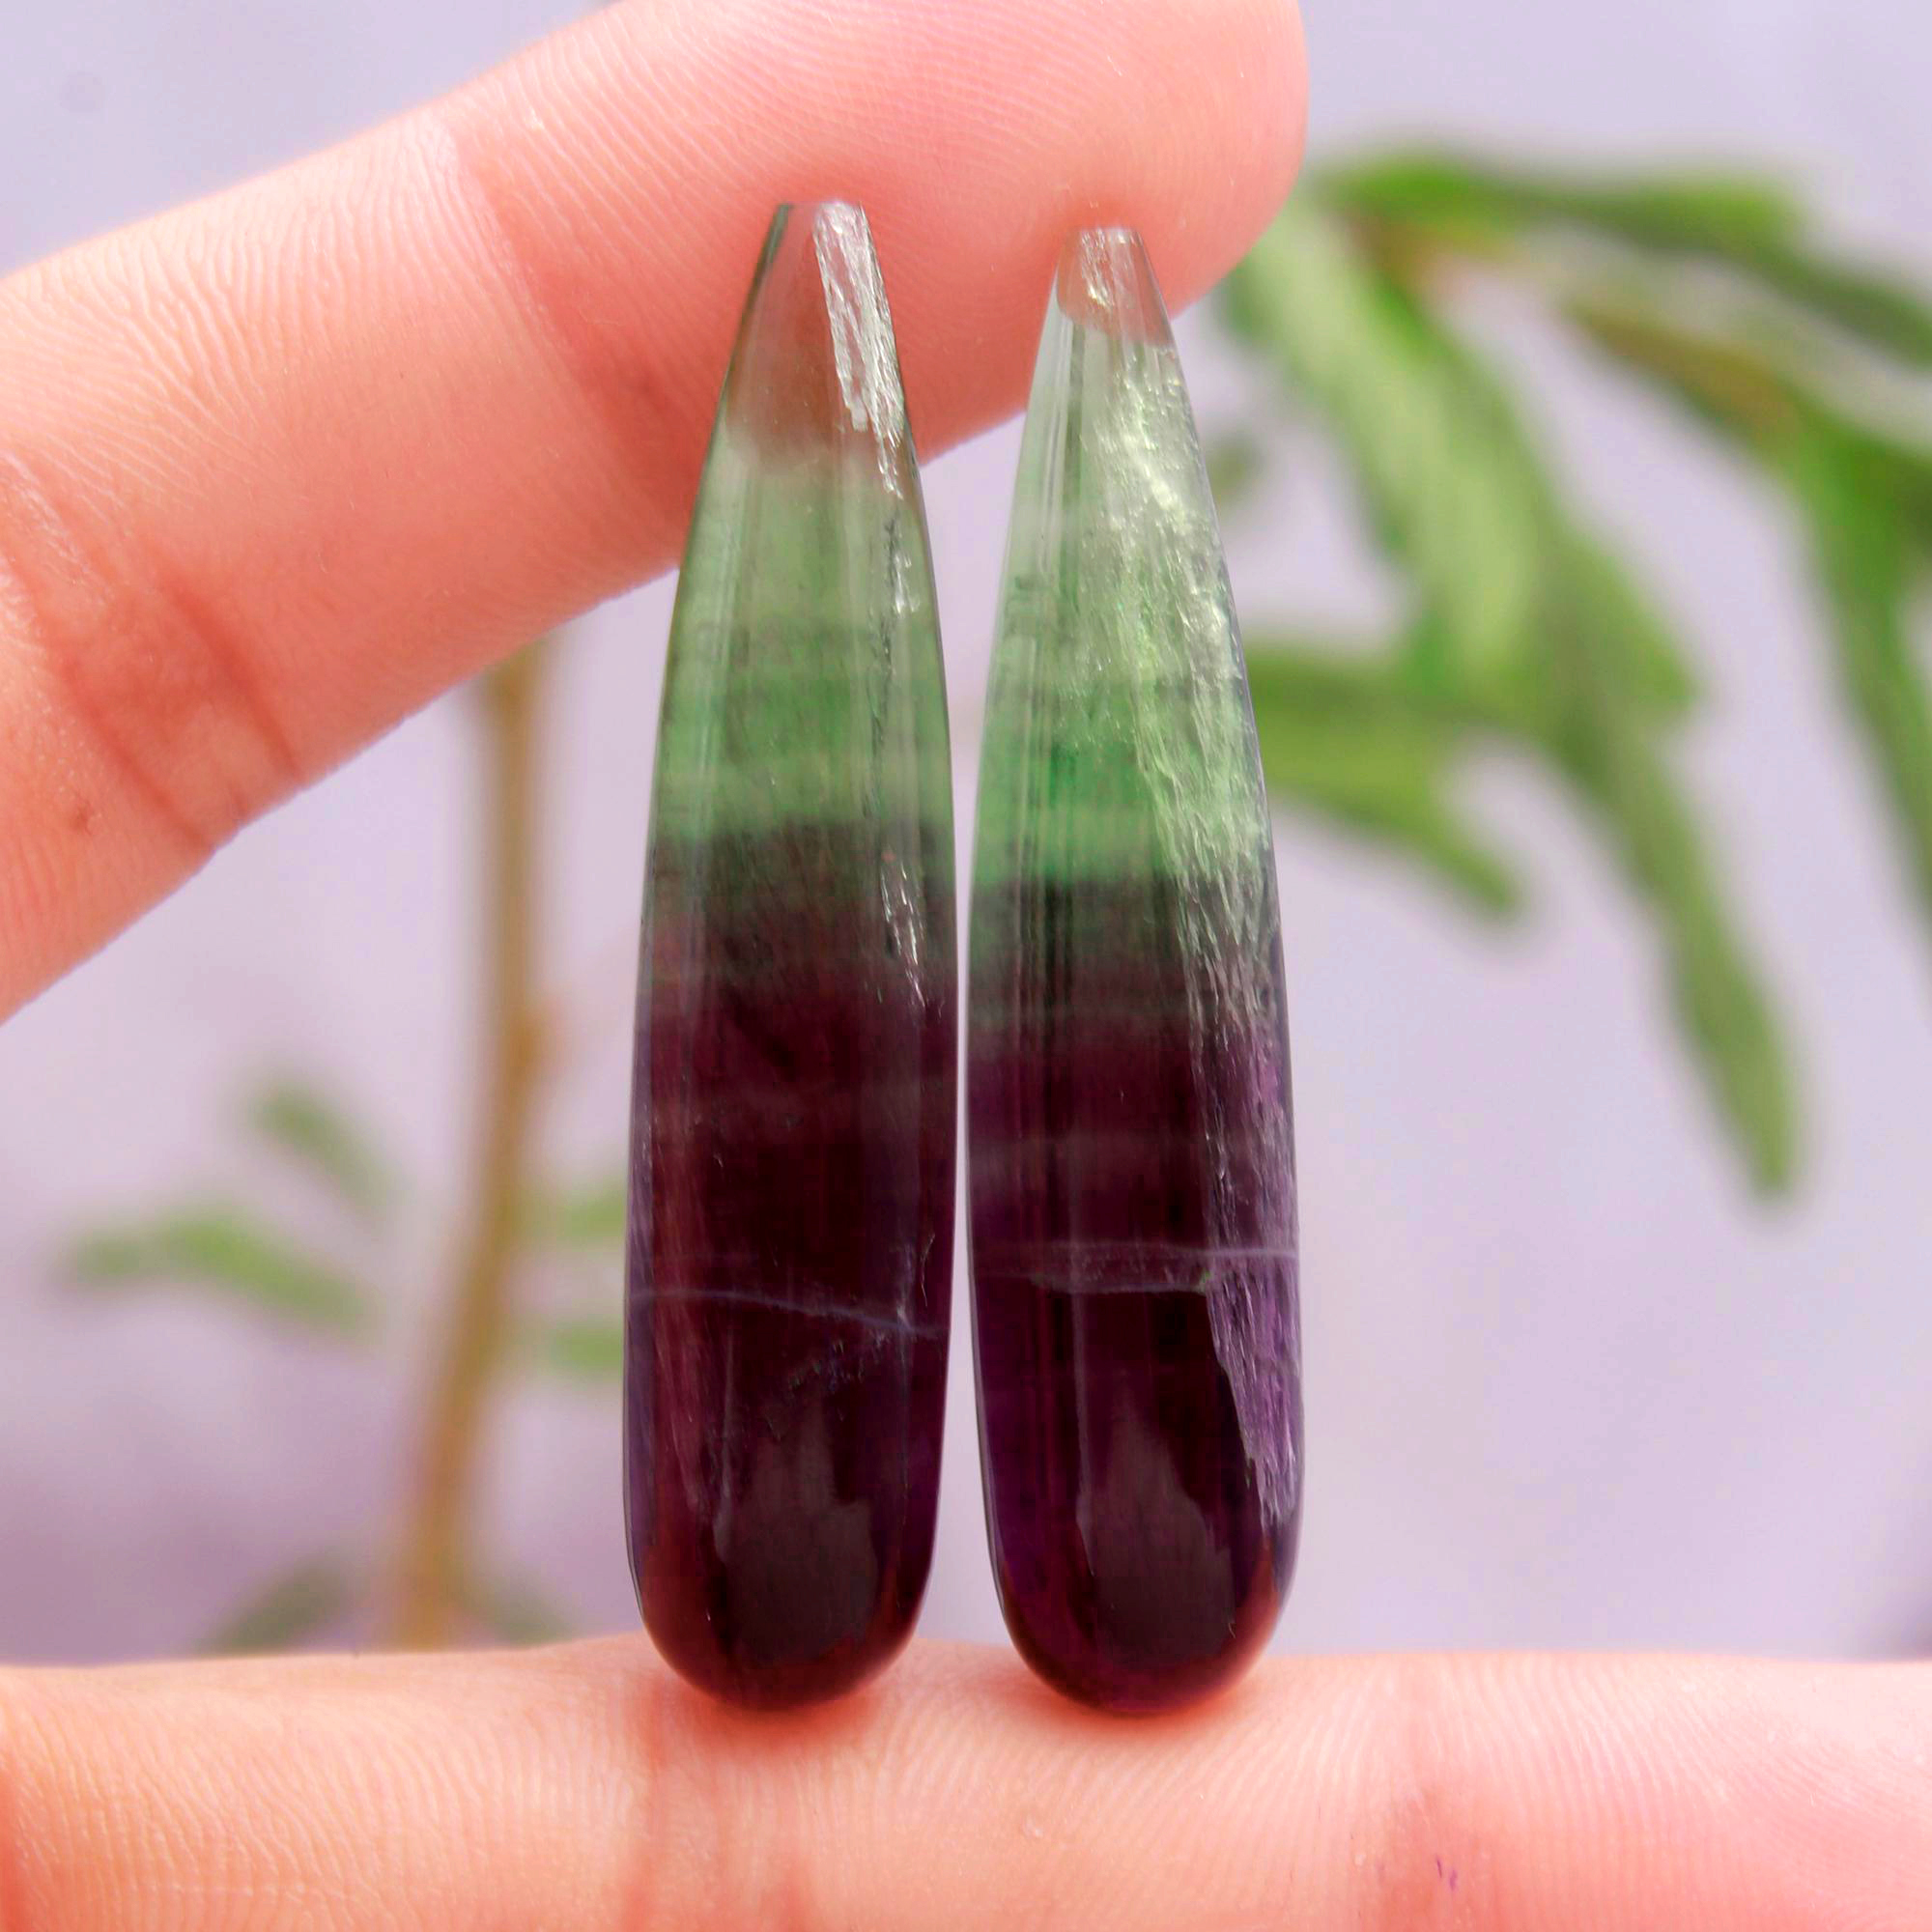 1Pair 80Cts Natural Flourite Loose Cabochon Gemstone Pair Lot Both Side Polished For Jewelry Making 45X10mm #1127